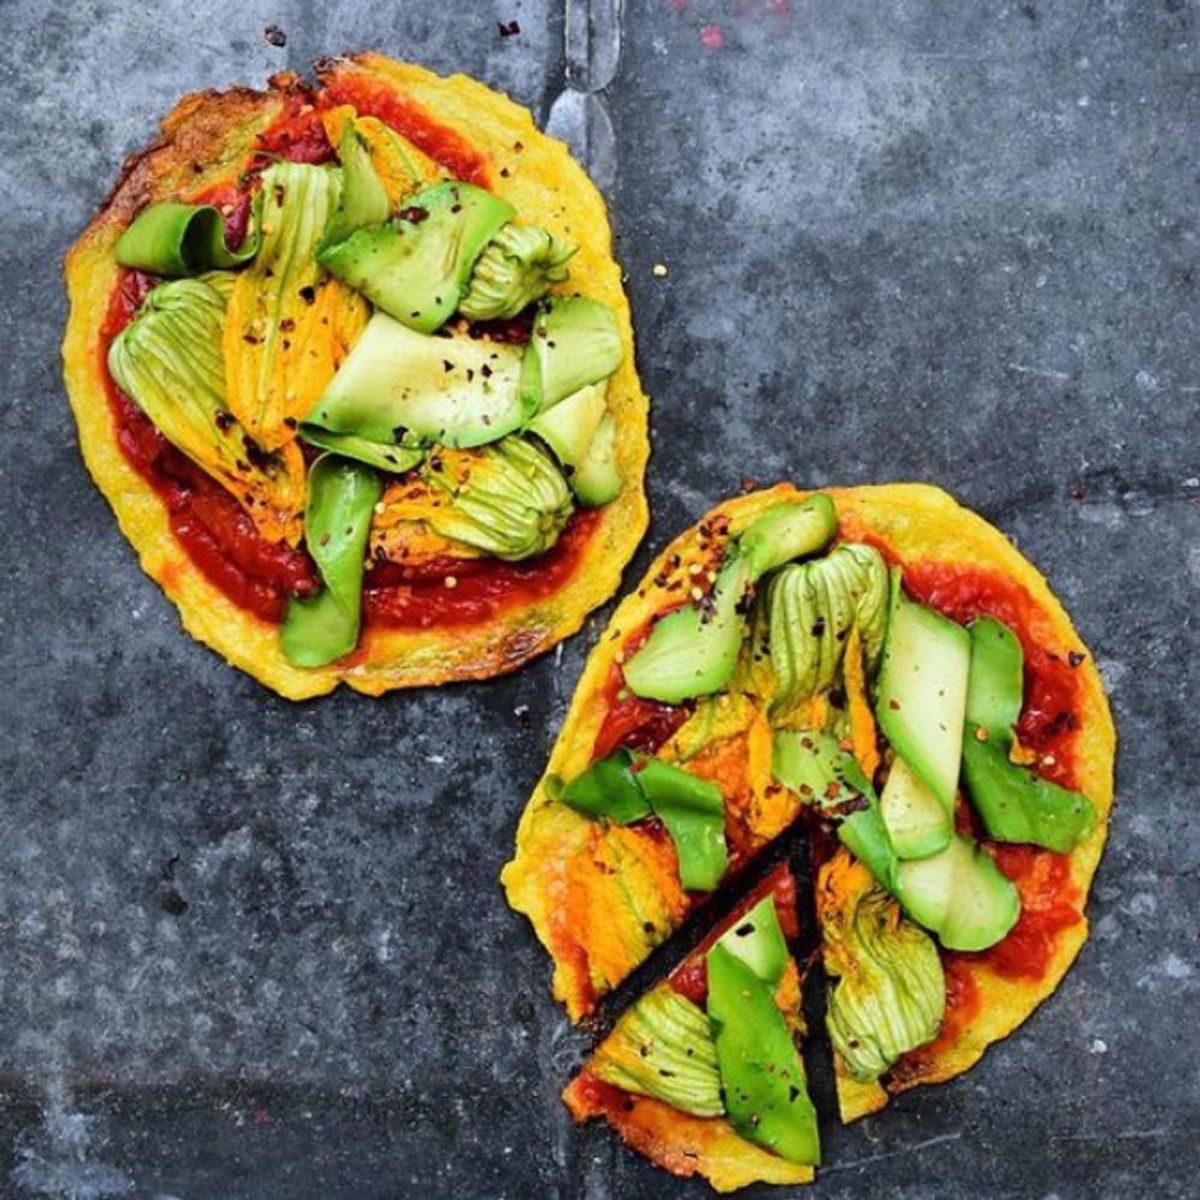 This Must-Follow Instagram Takes the Shaved Avocado Trend to a Whole Other Level